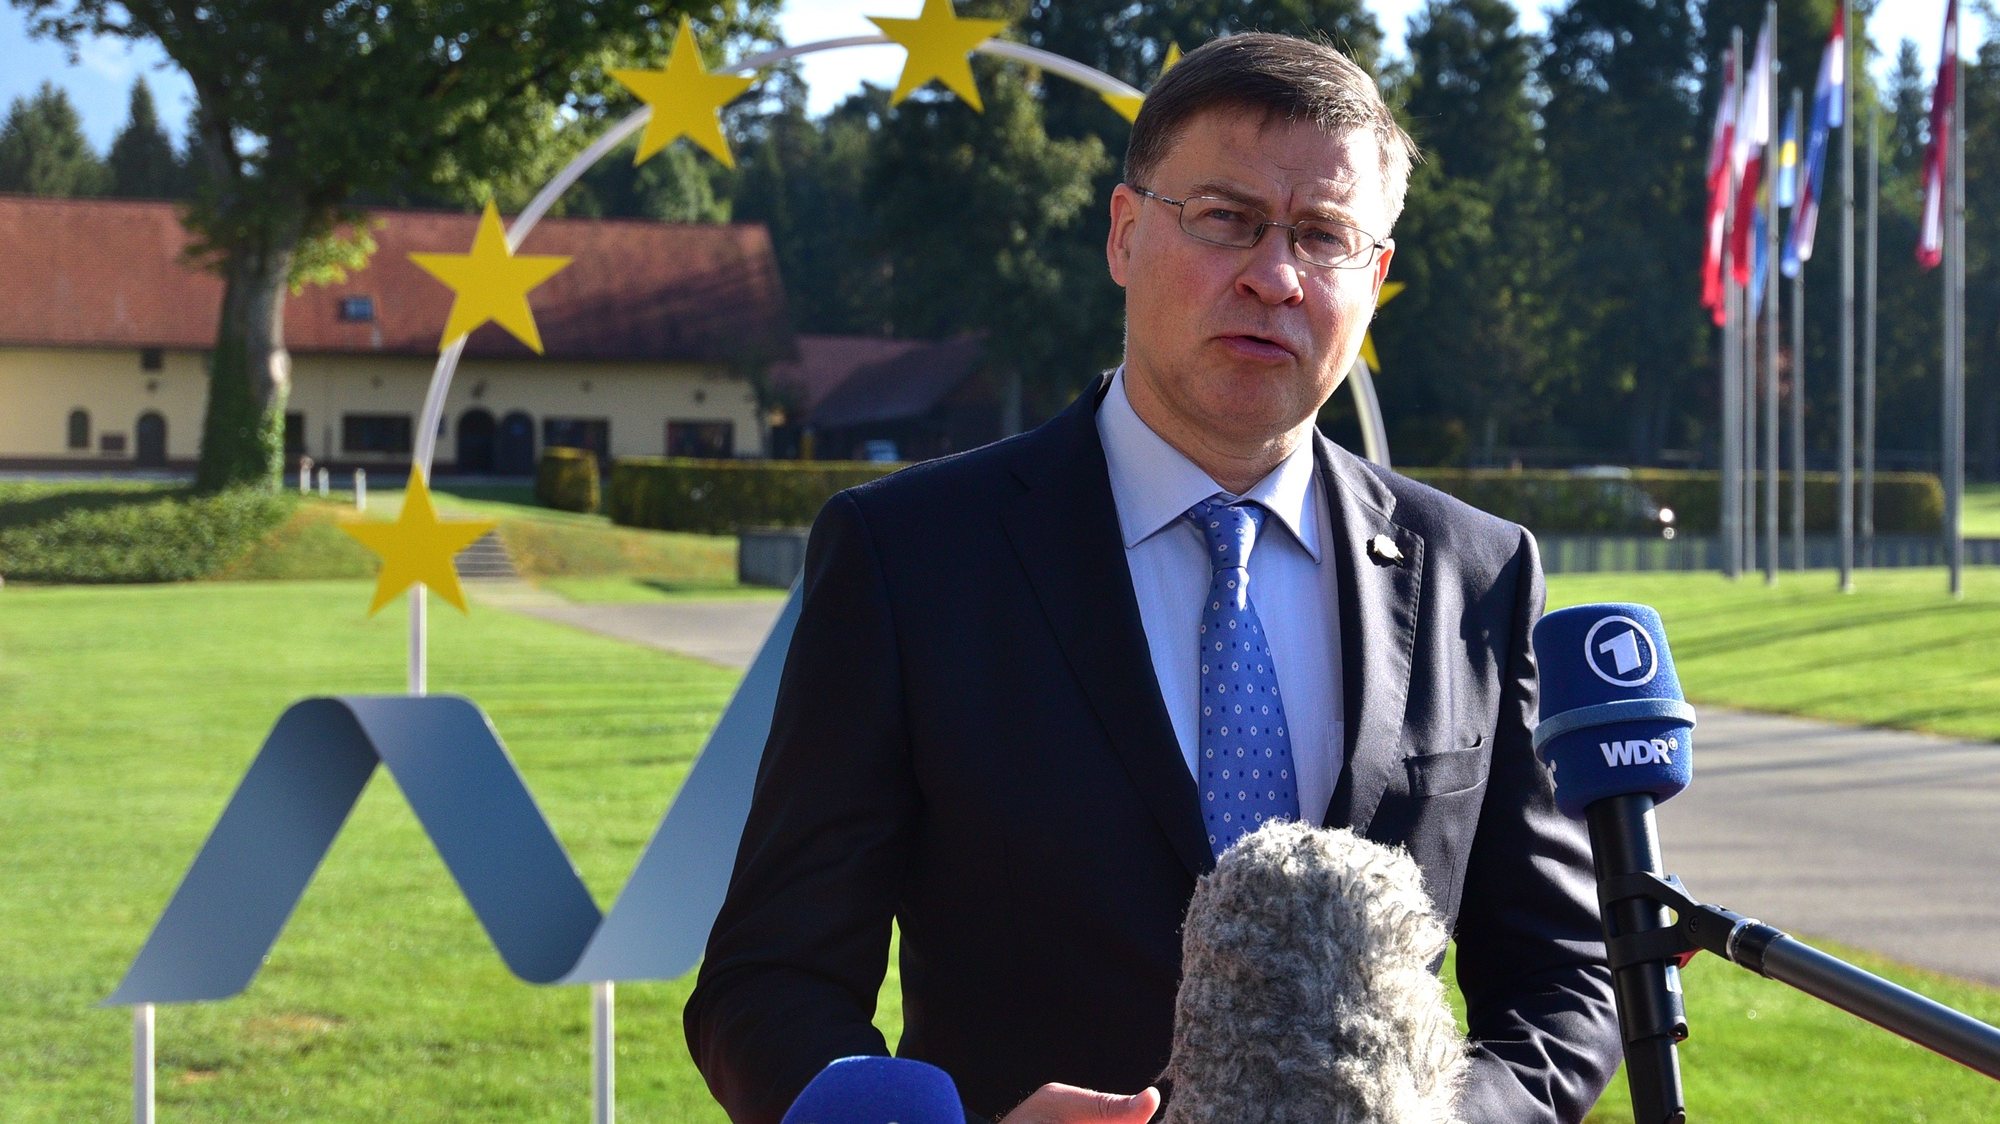 epa09459057 European Commission Executive Vice President Valdis Dombrovskis speaks before an Informal meeting of EU Ministers for Economic and Financial Affairs, at the Kongresni center Brdo, Predoslje, Slovenia, 10 September 2021. Slovenia is hosting a two-day Informal Meeting of EU Ministers for Economic and Financial Affairs.  EPA/IGOR KUPLJENIK